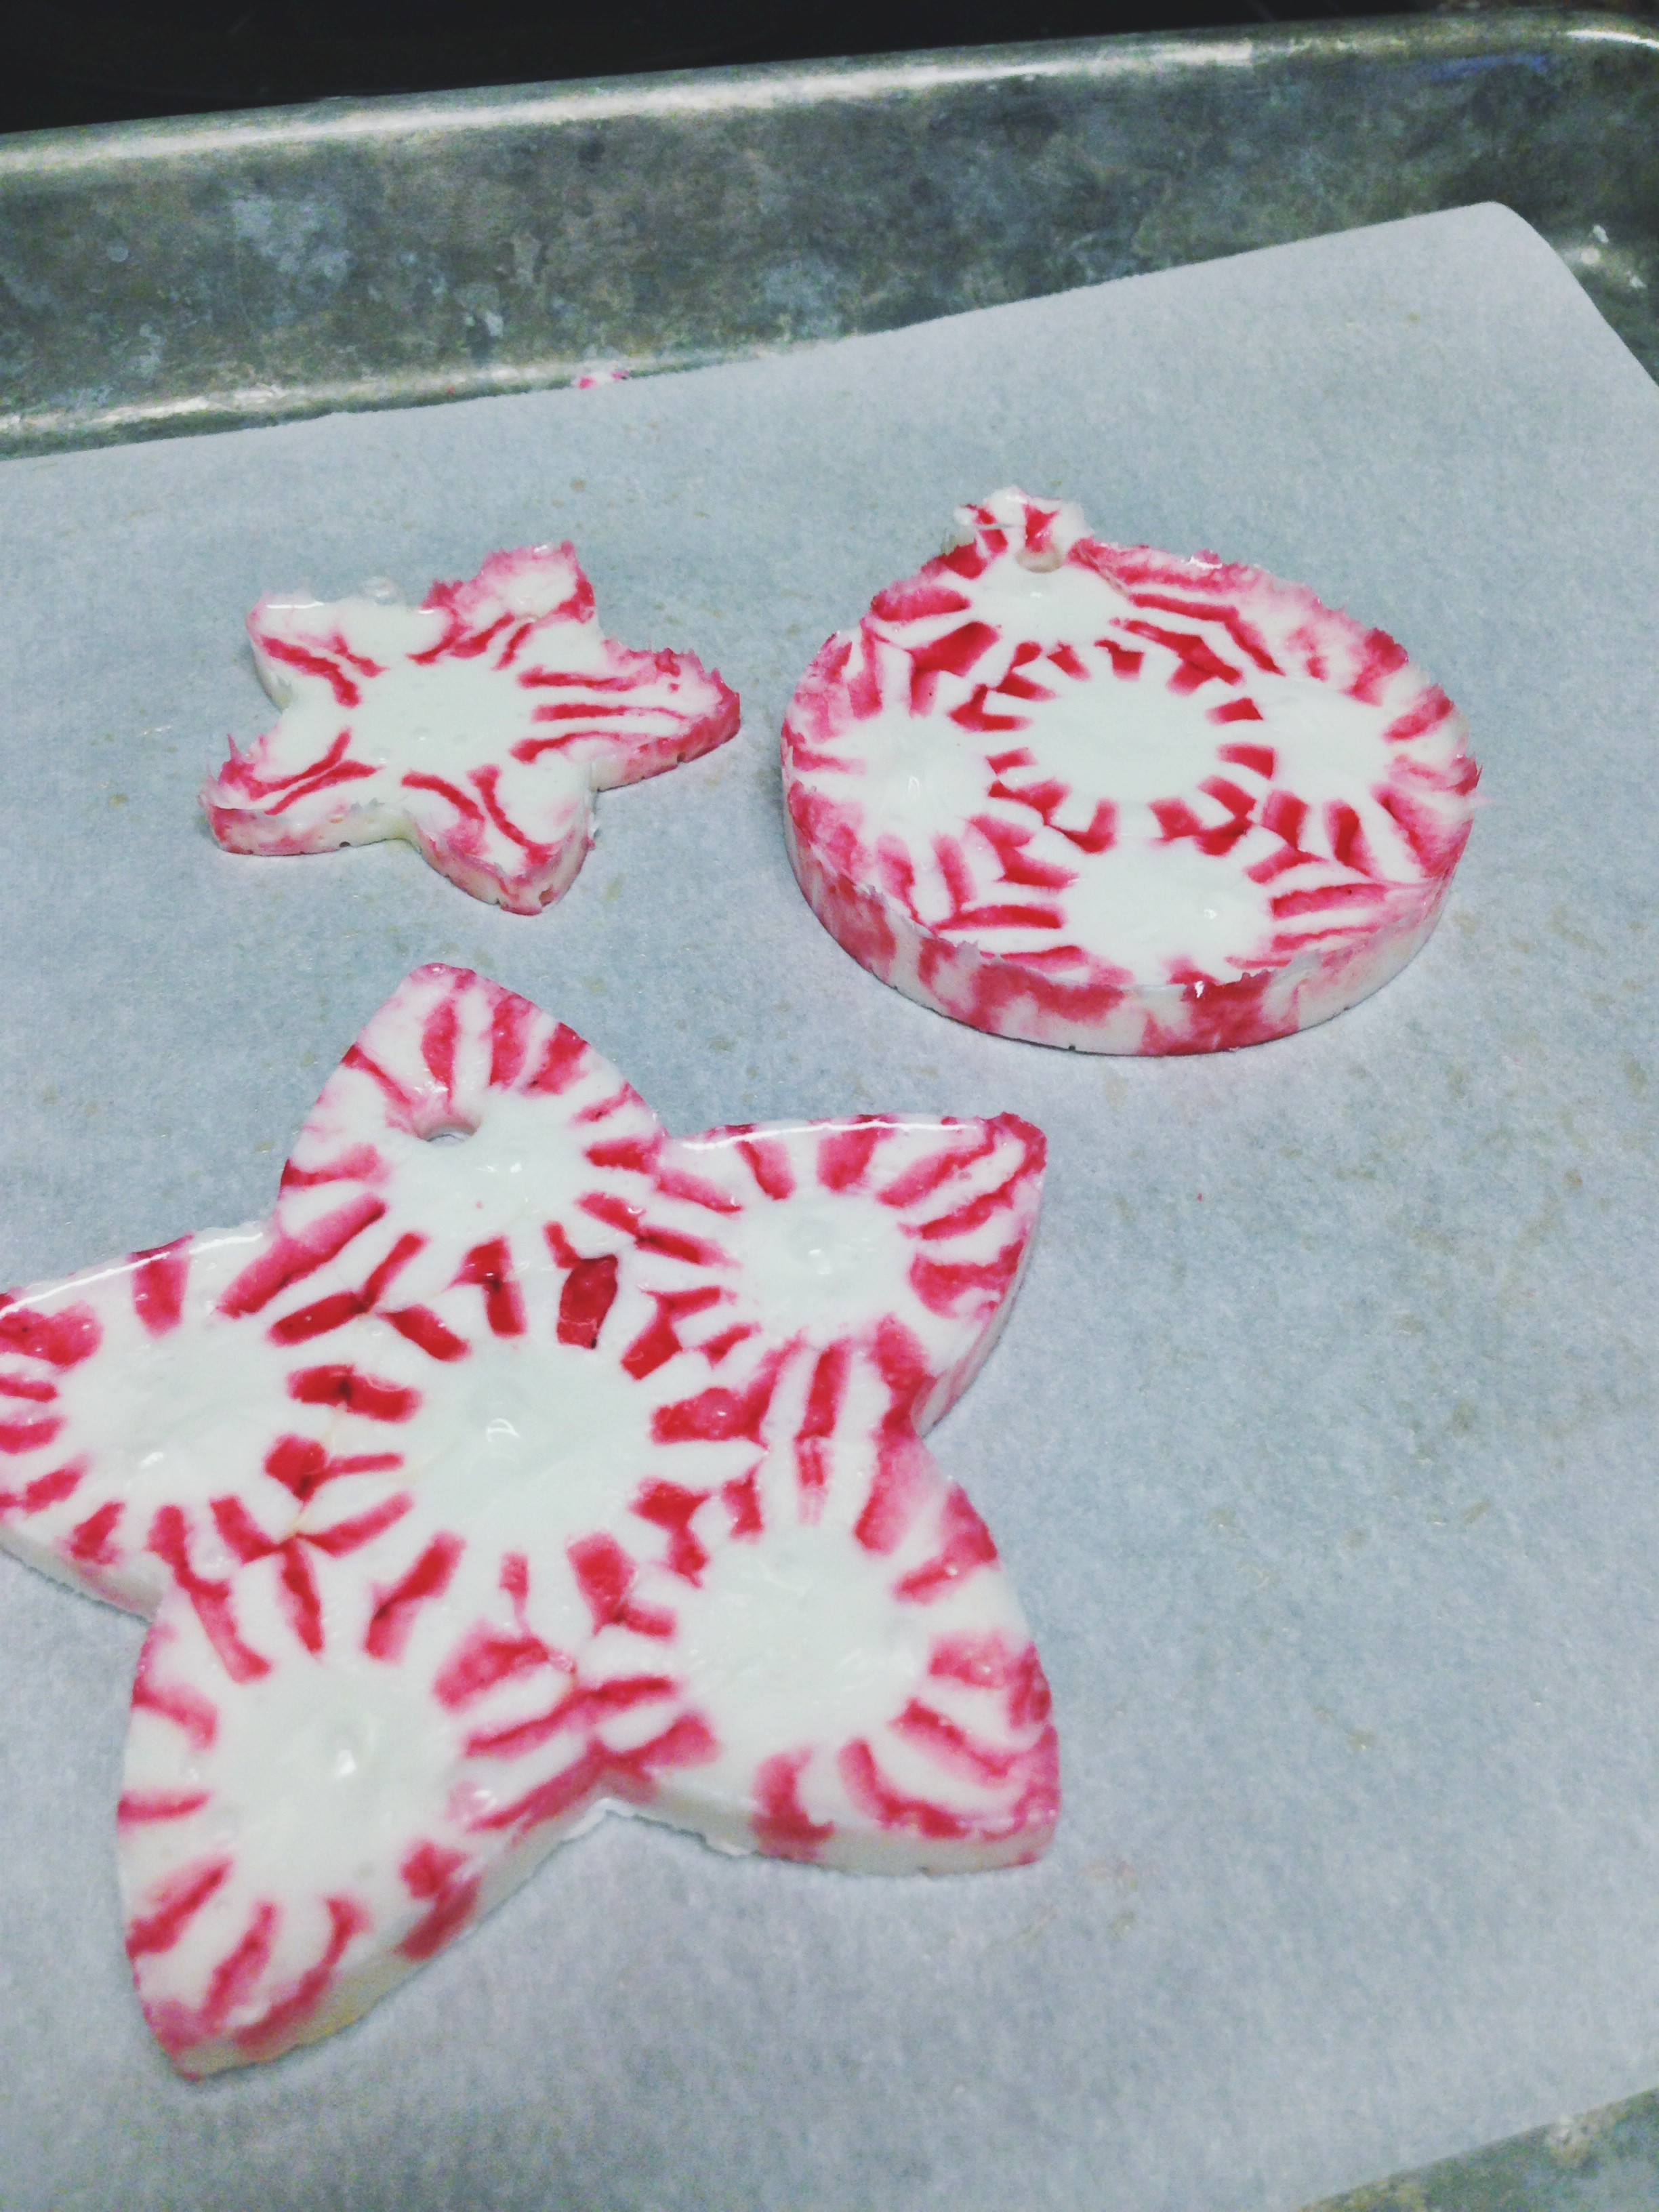 Candy Christmas Ornaments To Make
 Peppermint Candy Christmas Ornaments